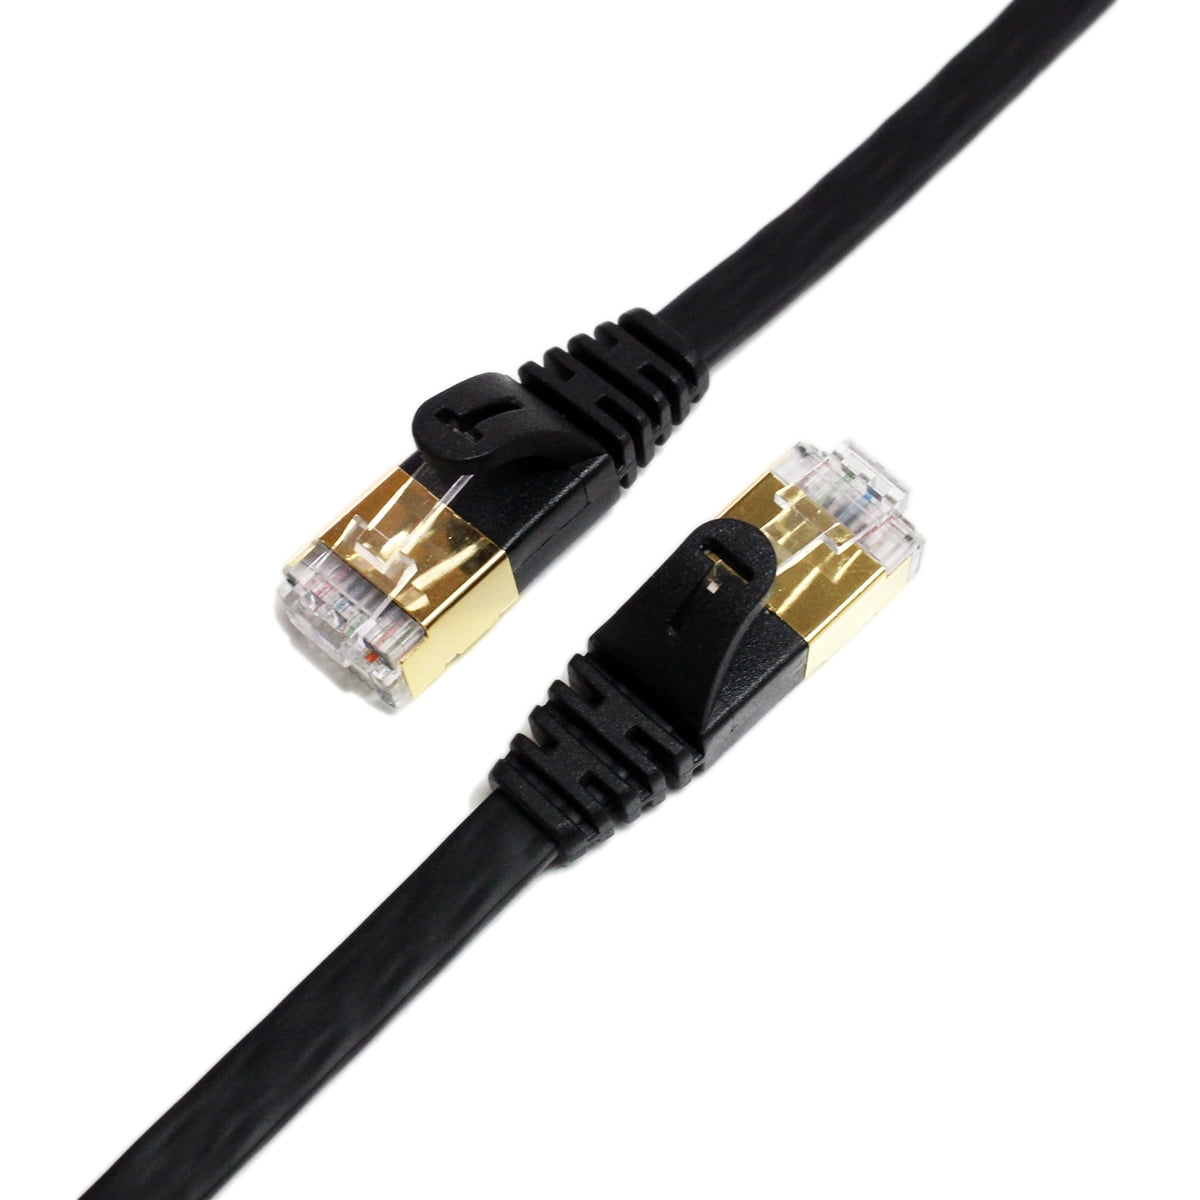 CAT7 10 Gigabit Ethernet Ultra Flat Patch Cable 25 Ft Router PS3 Tera Grand